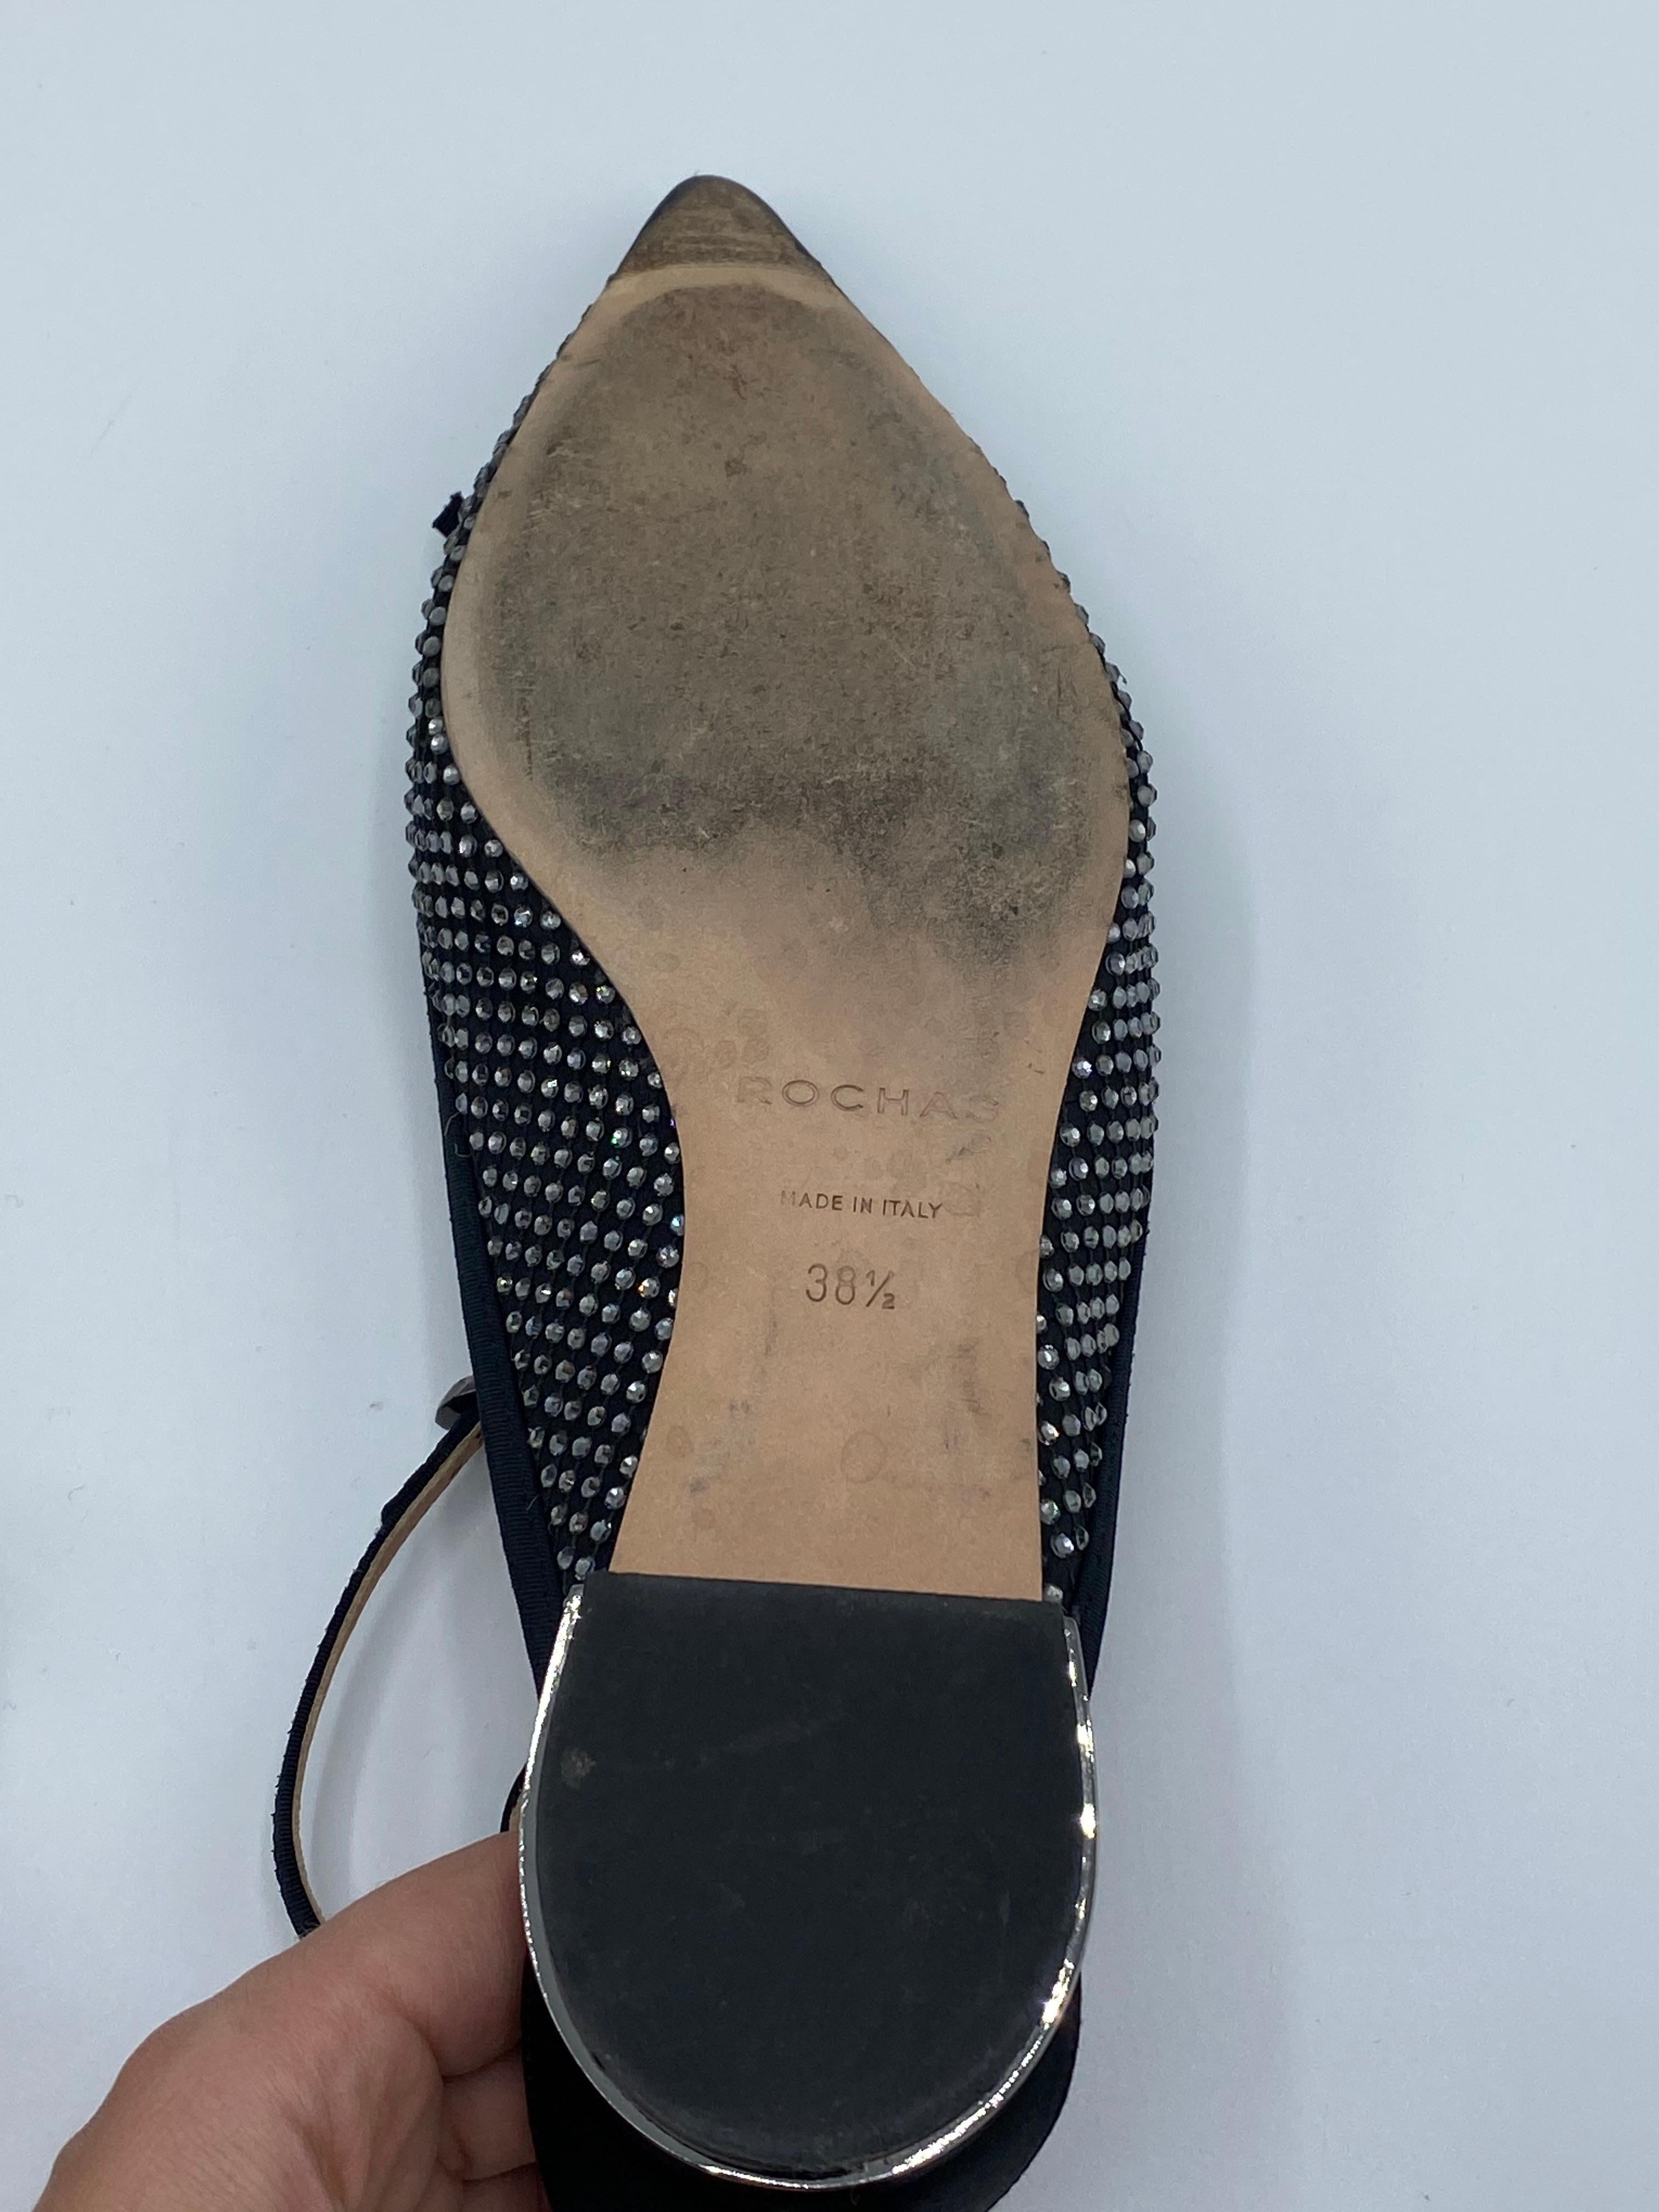 Rochas Paris Satin Grain and Black Pointed Toe Flats, Size 38.5 For Sale 6